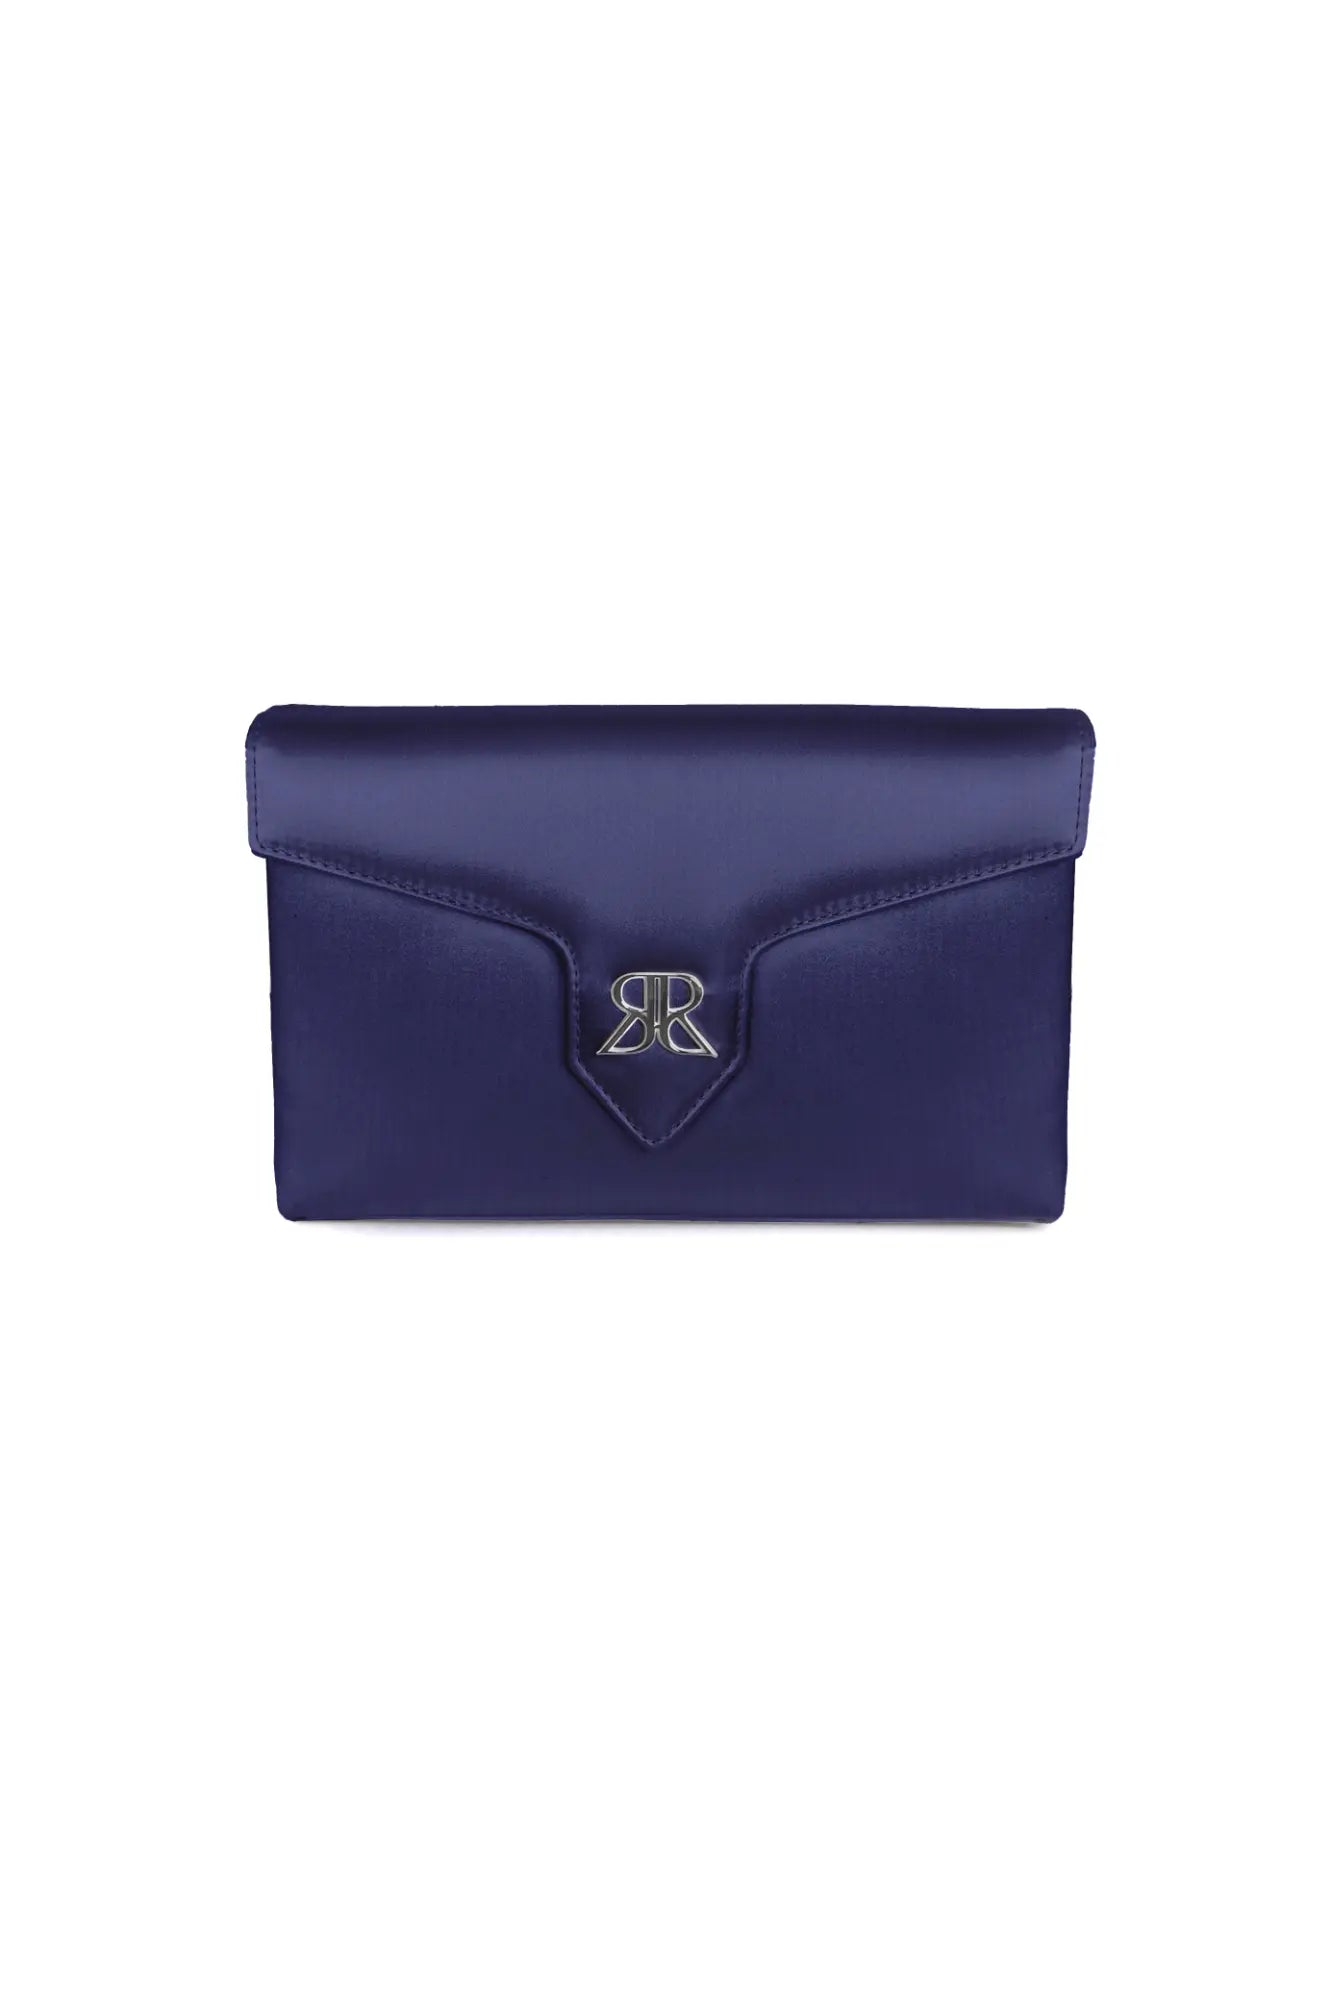 Love Note Envelope Clutch Navy from The Bella Rosa Collection with a branded emblem.